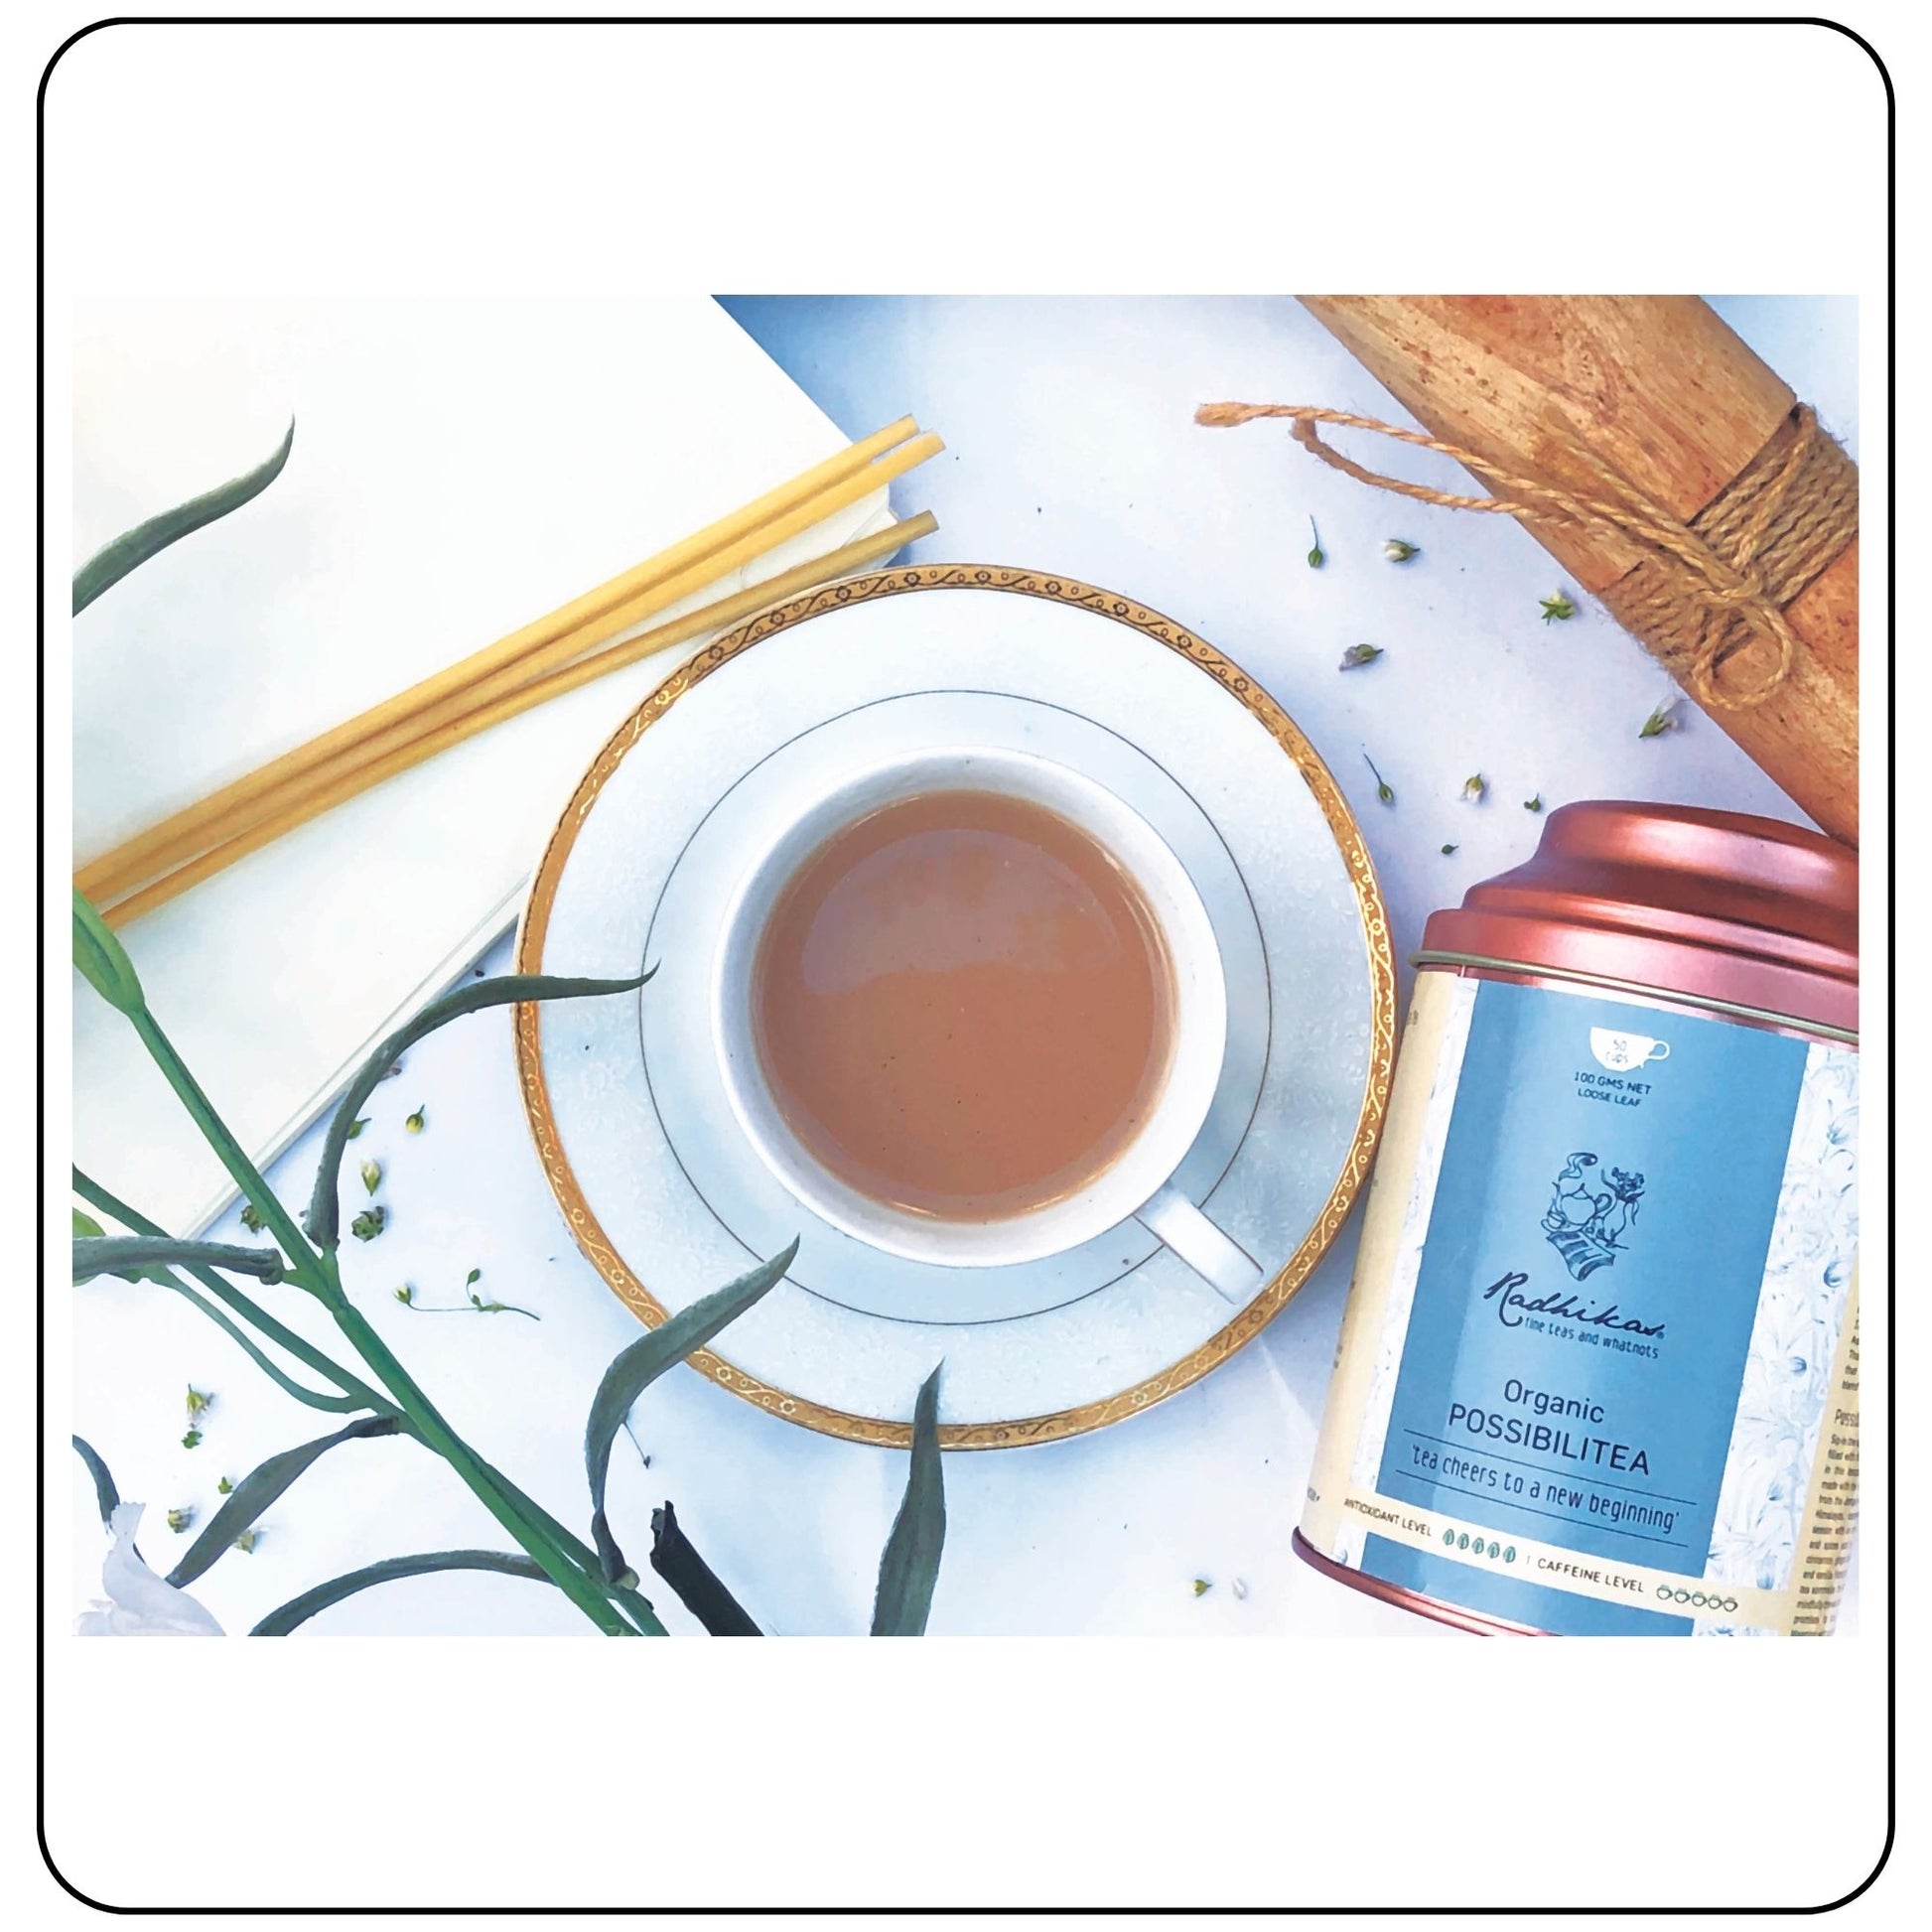 Organic Possibilitea - How Organic Possibilitea Can Stimulate Your Senses and Balance Your Sugar Levels - Radhikas Fine Teas and Whatnots